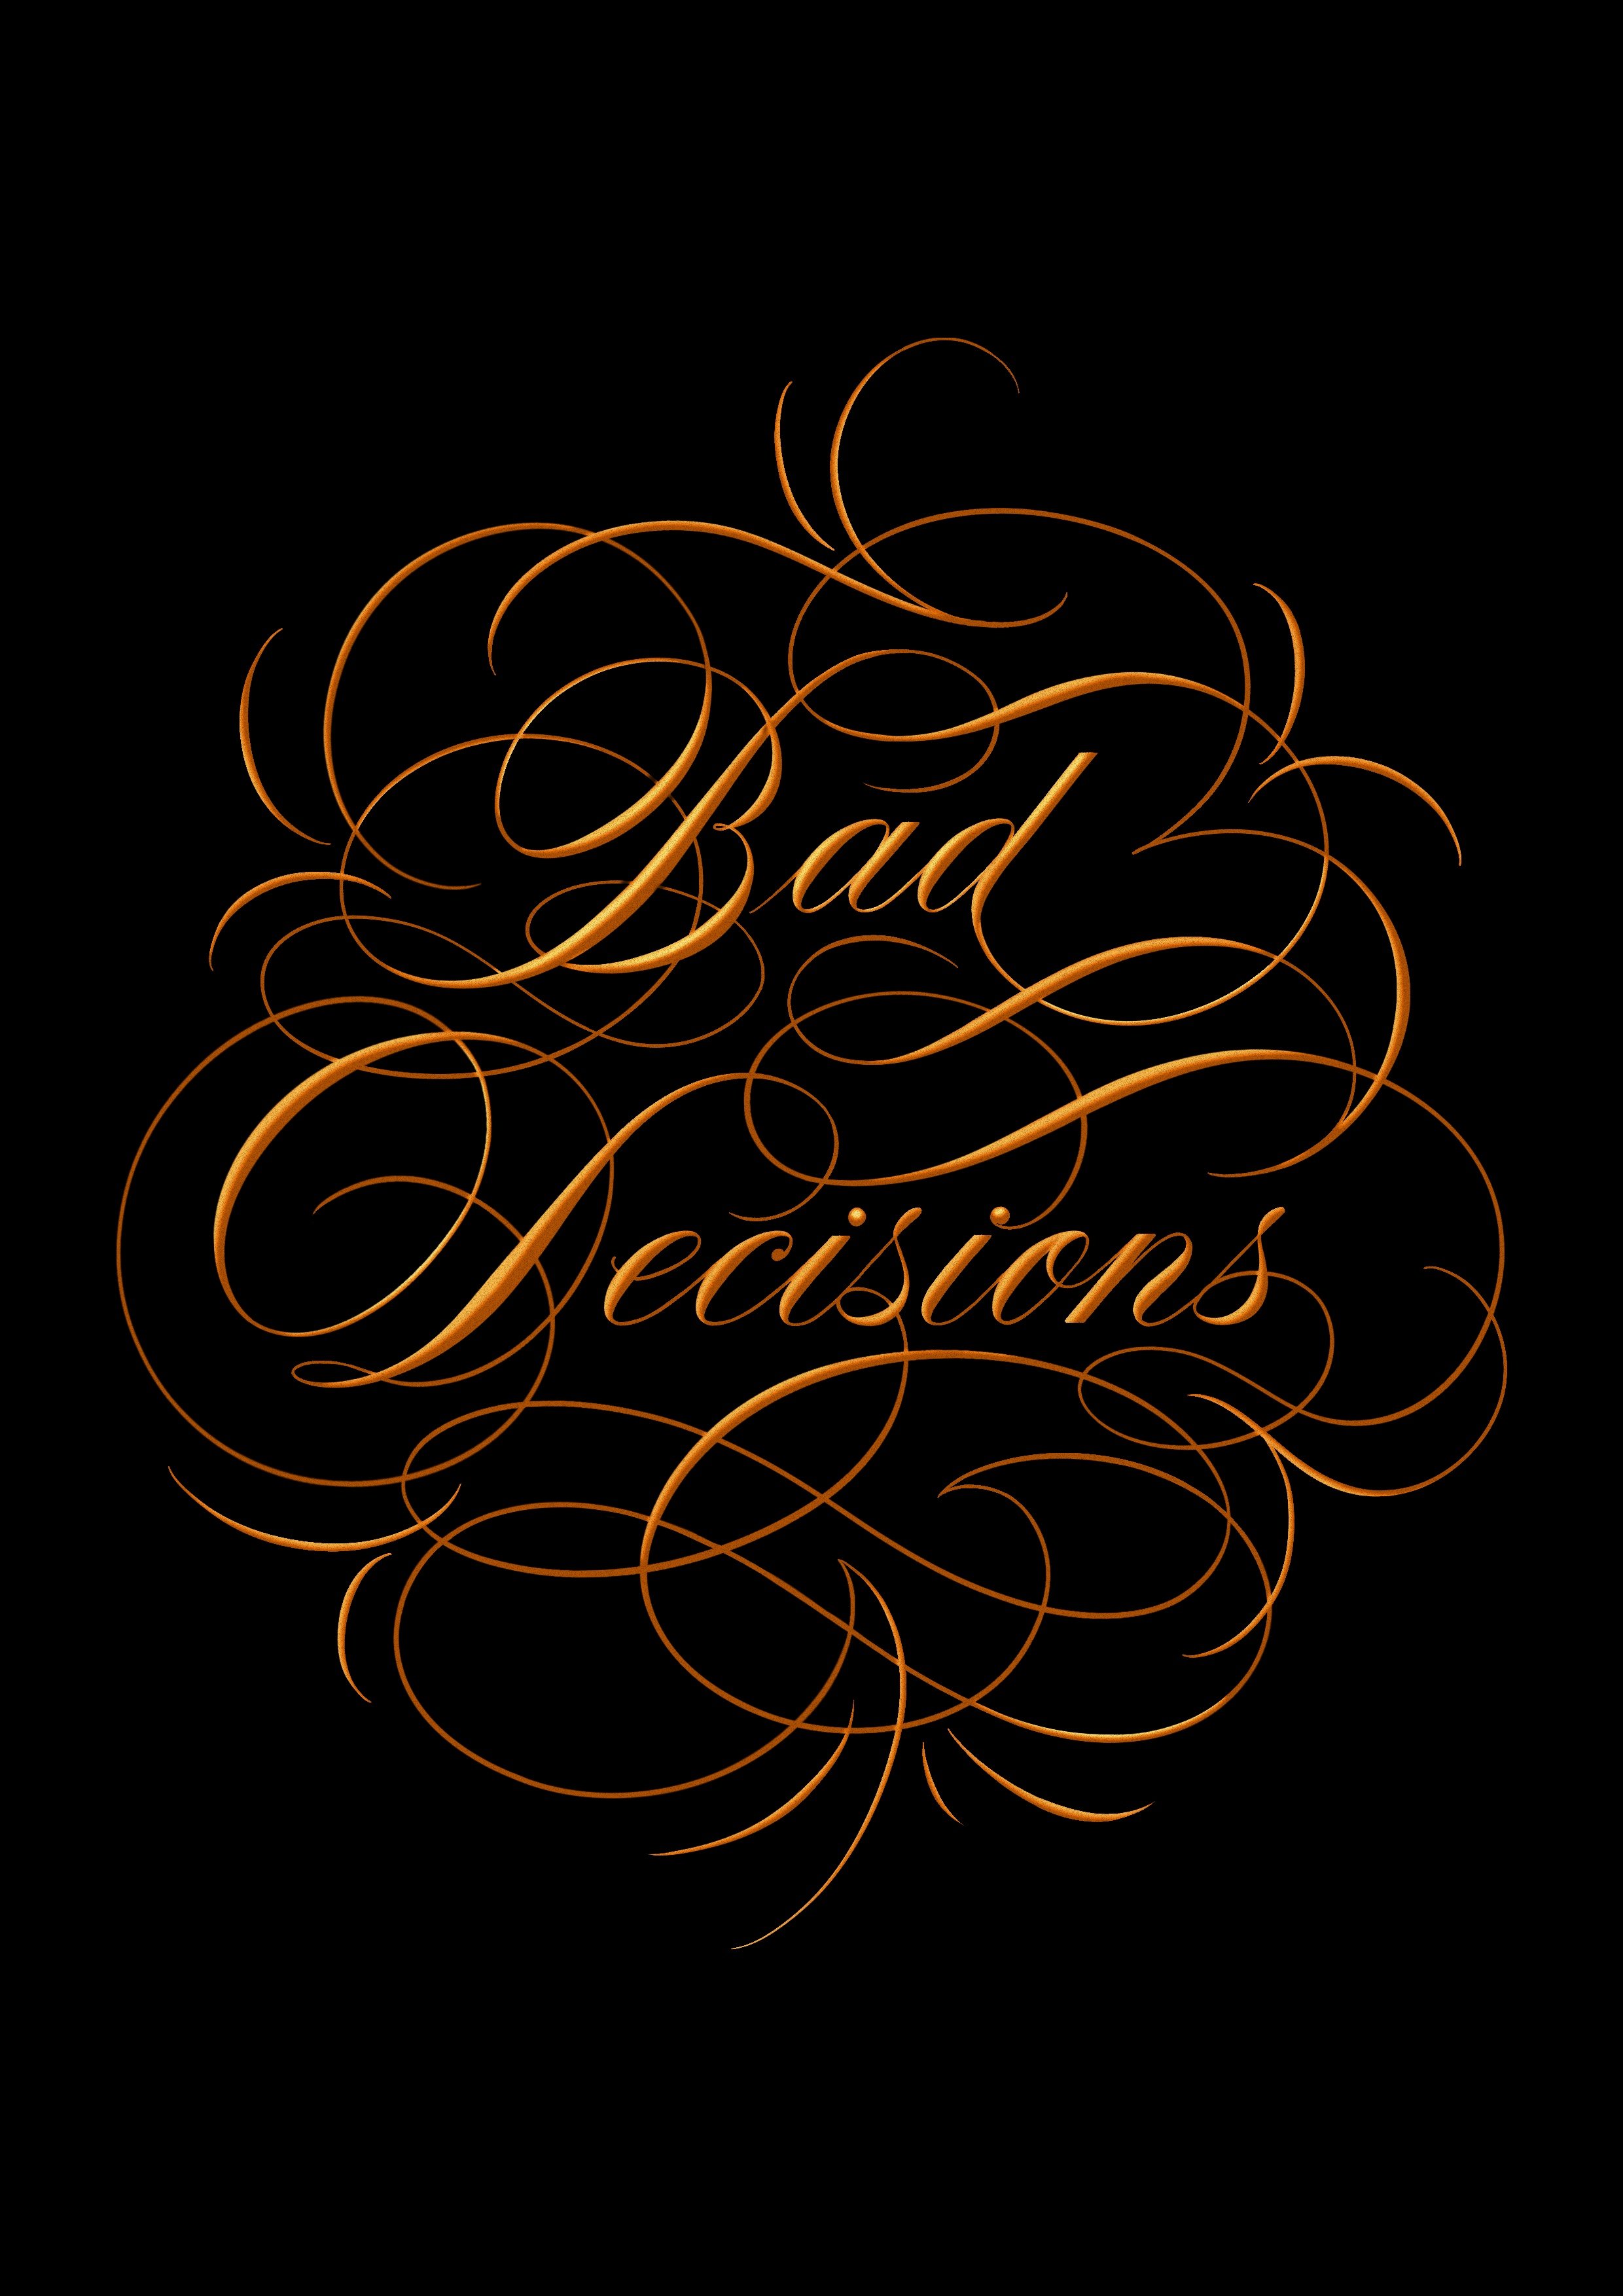 Bad Decisions by benny blanco, BTS & Snoop Dogg : Script Lettering Song Title Design - GOLD.jpg